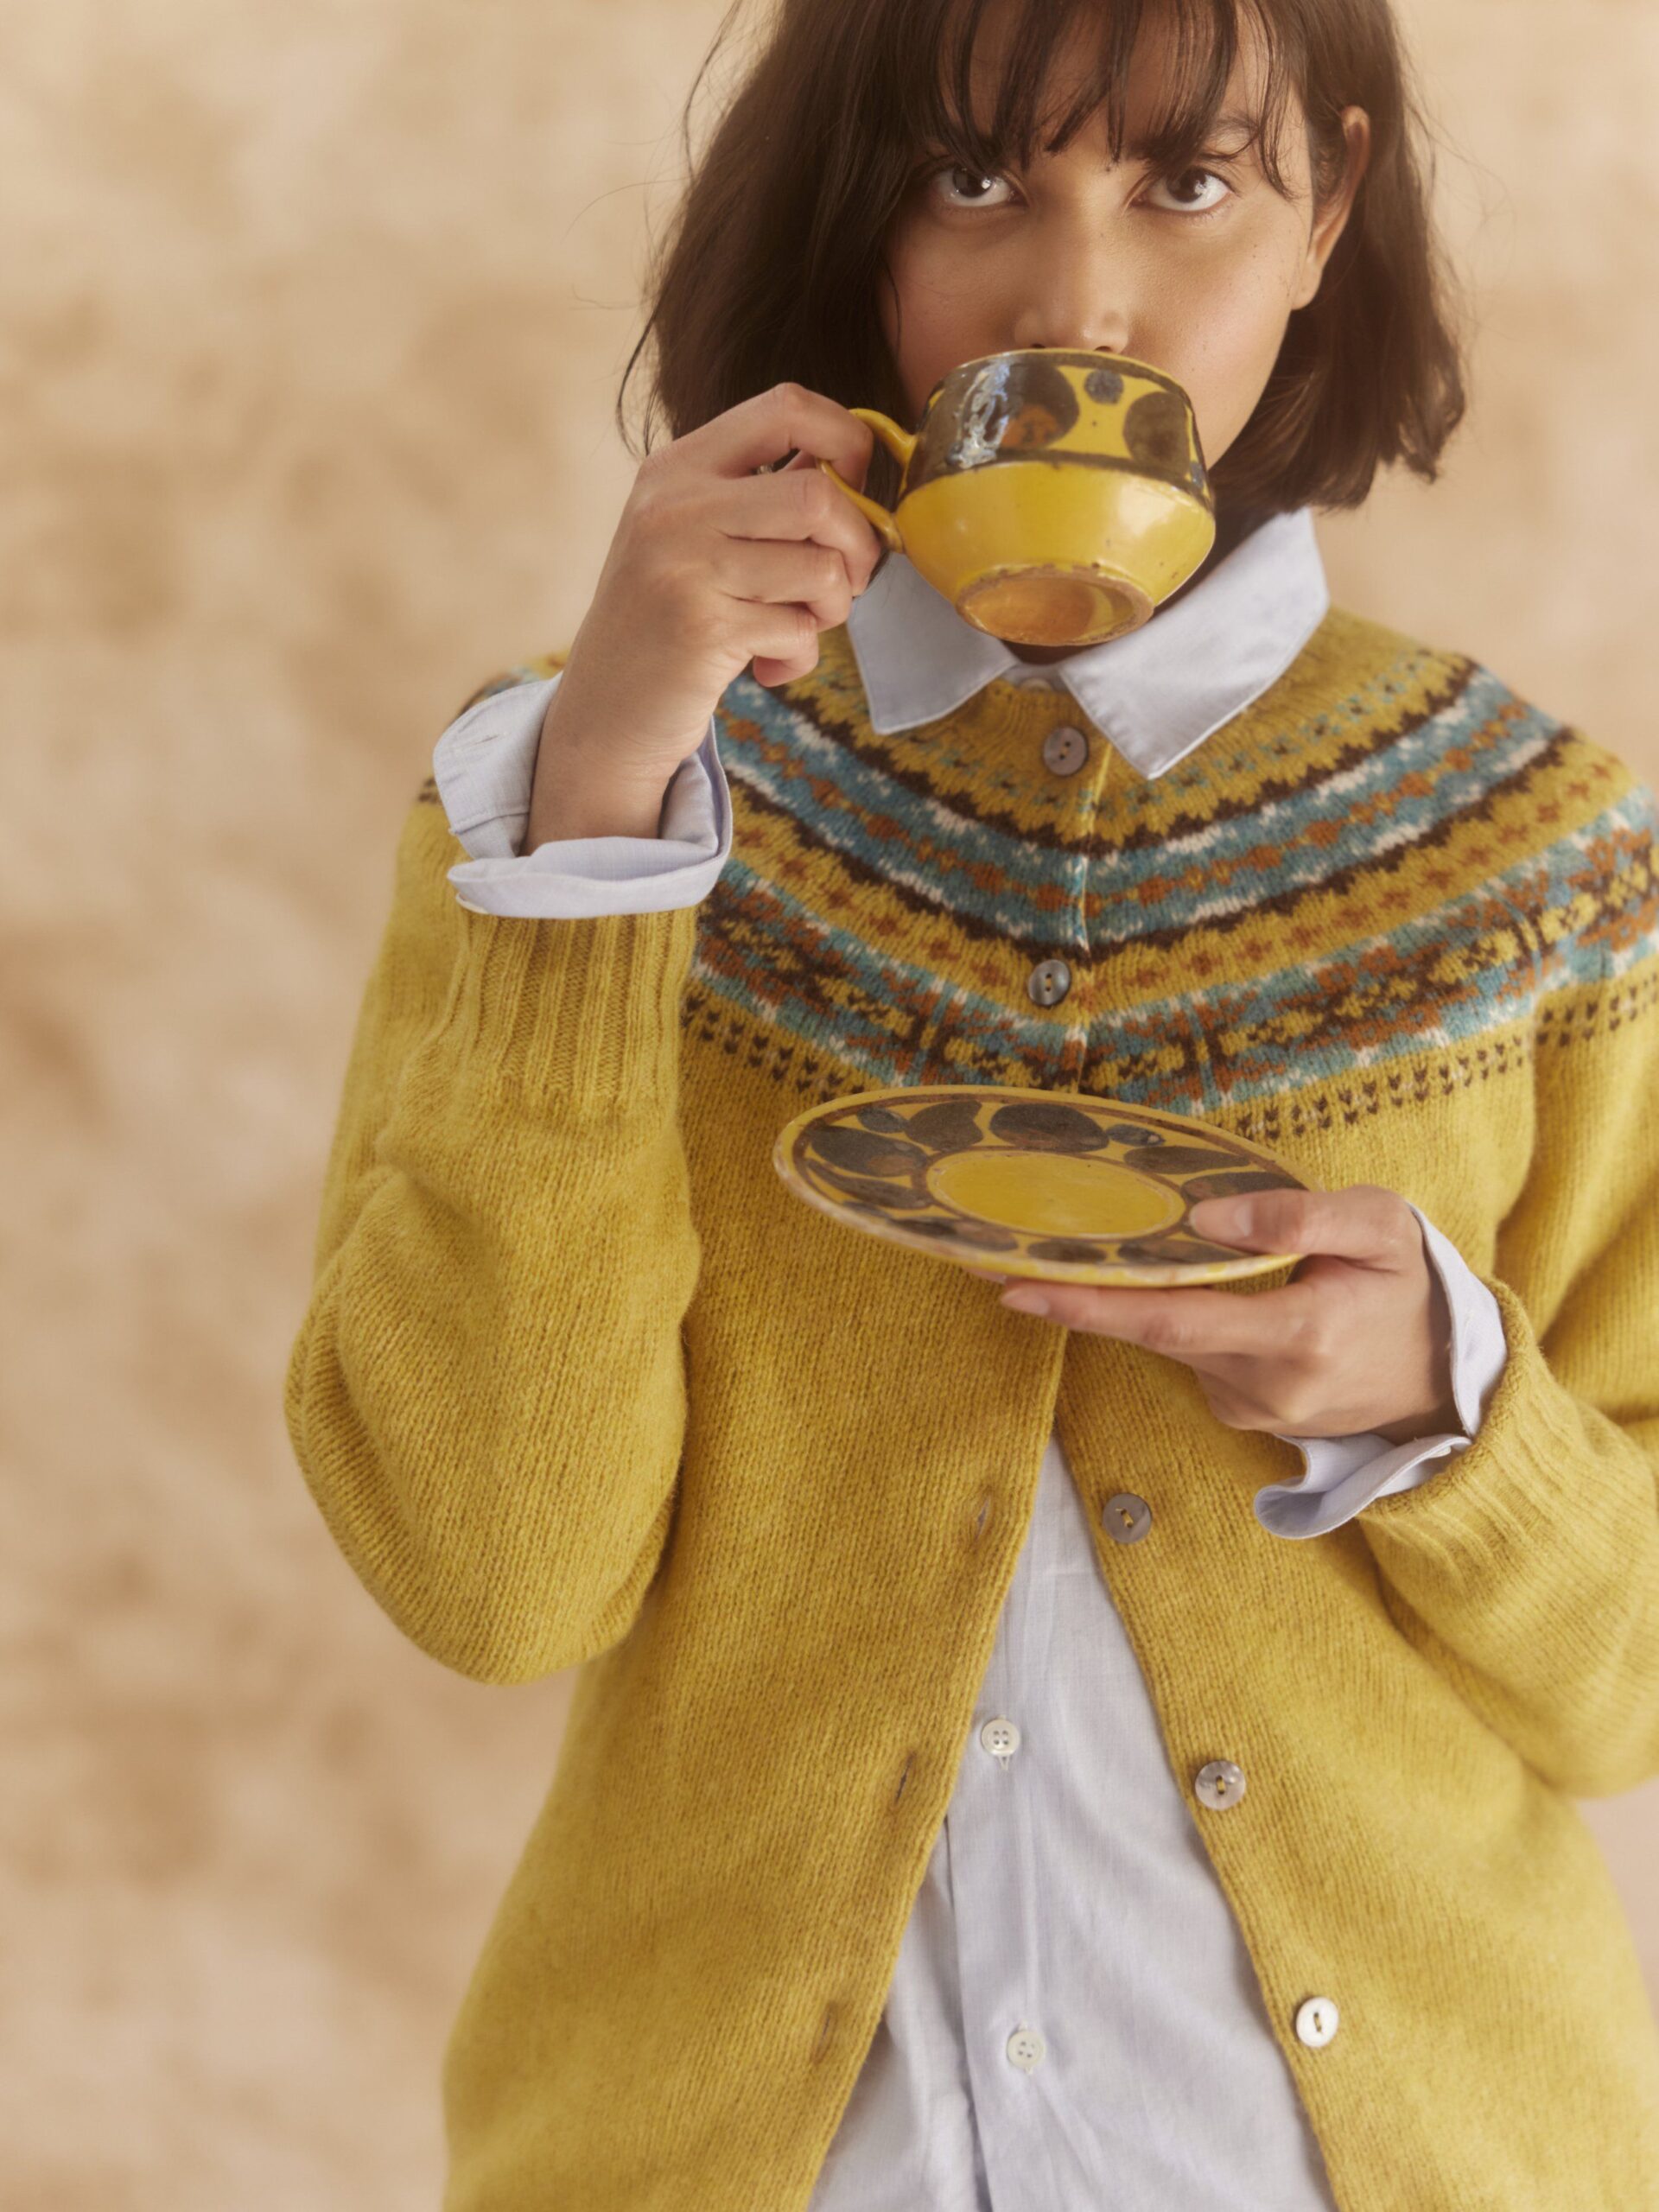 How to Wear Yellow Cardigan Sweater: Best 13 Cheerful Outfits for Women